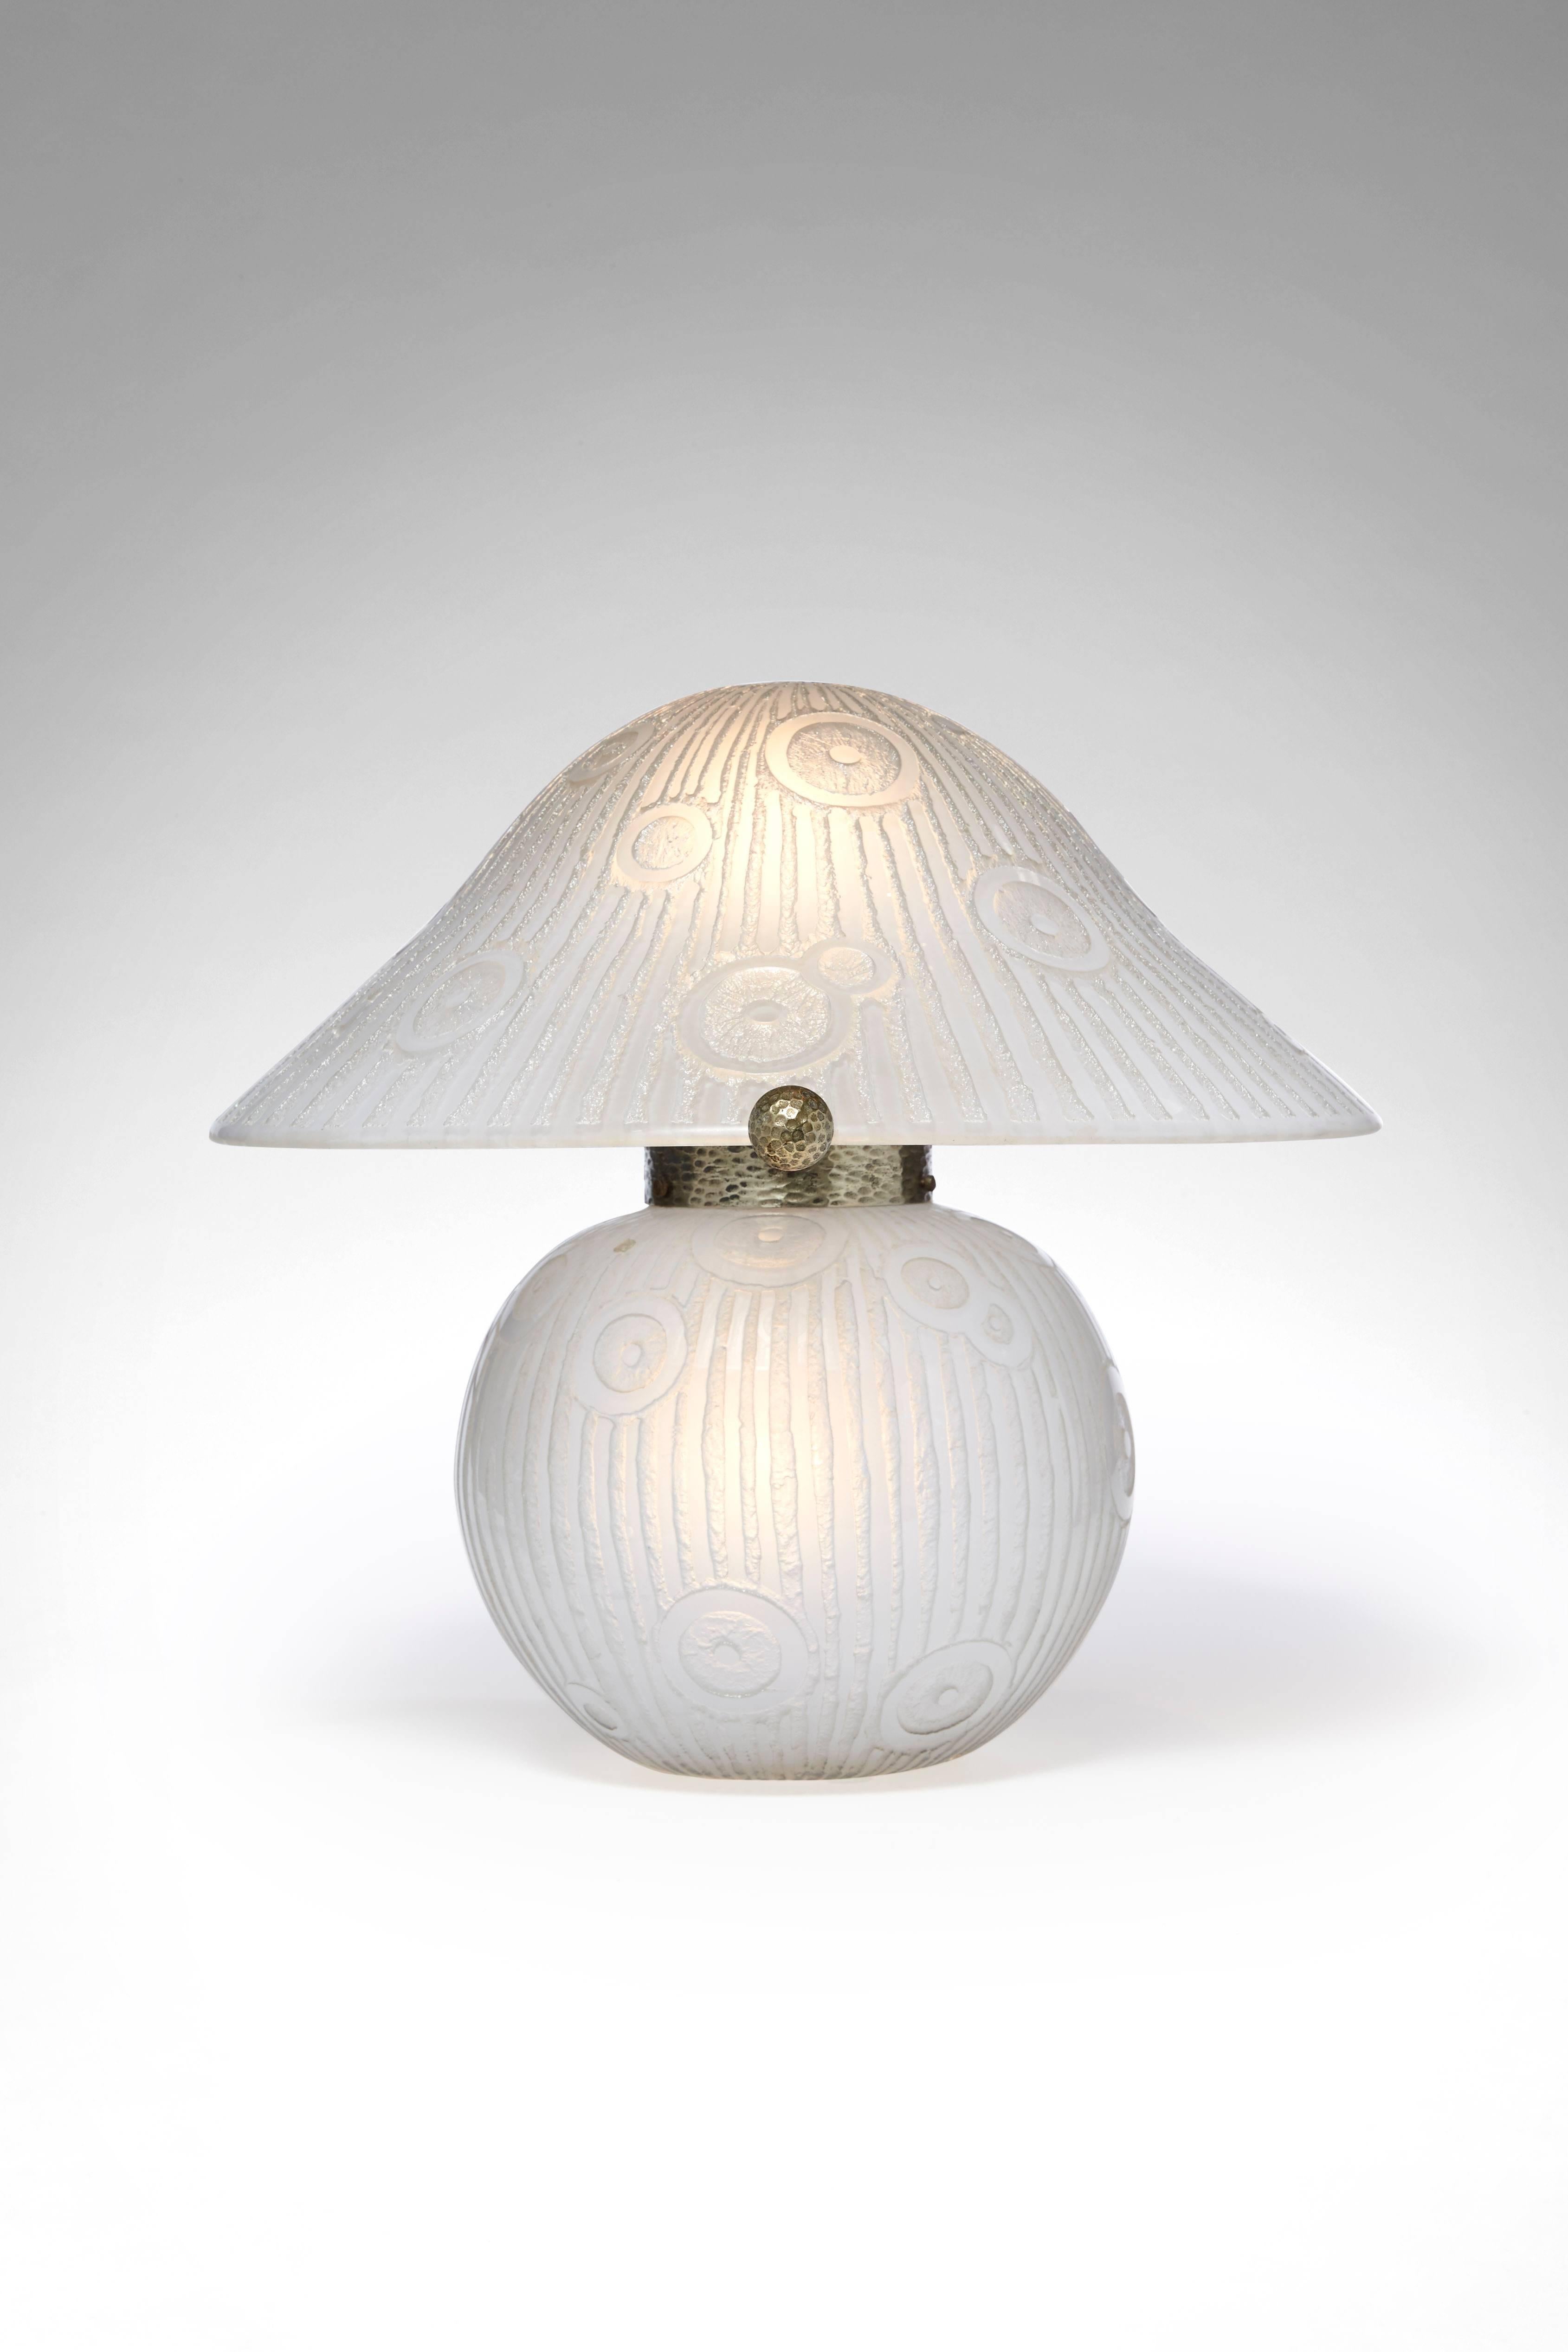 Frosted Mushroom Lamp by Daum, circa 1930